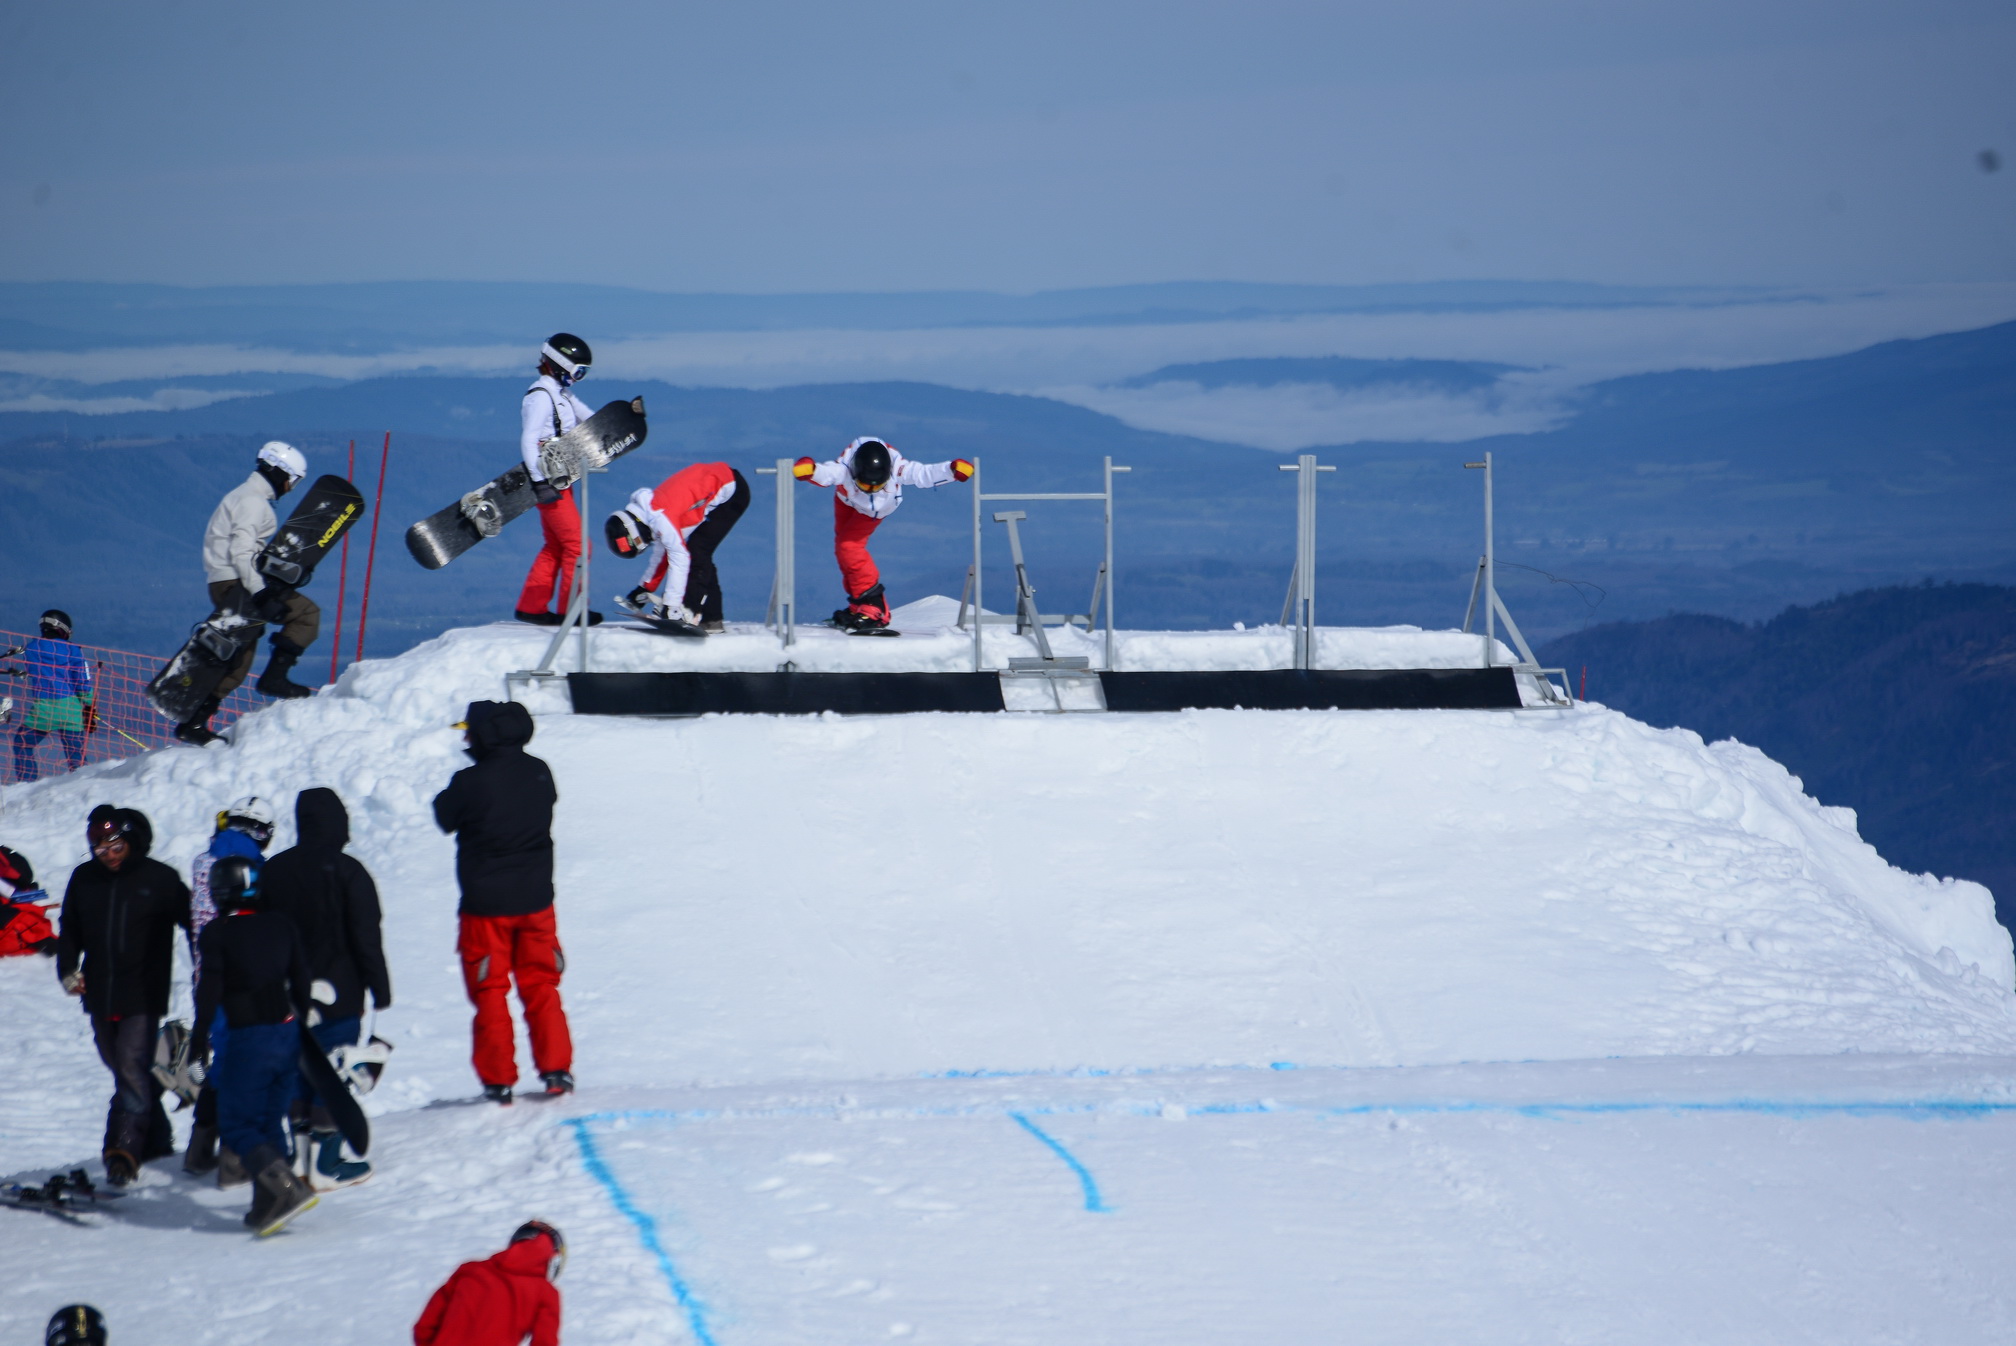 We are training, full snow, ready tracks, athletes from China National Snowboard Team supervised by China Water Sports Administration Center, prepare for next Olimpics Games, Beijing 2022, Villarrica-Pucon